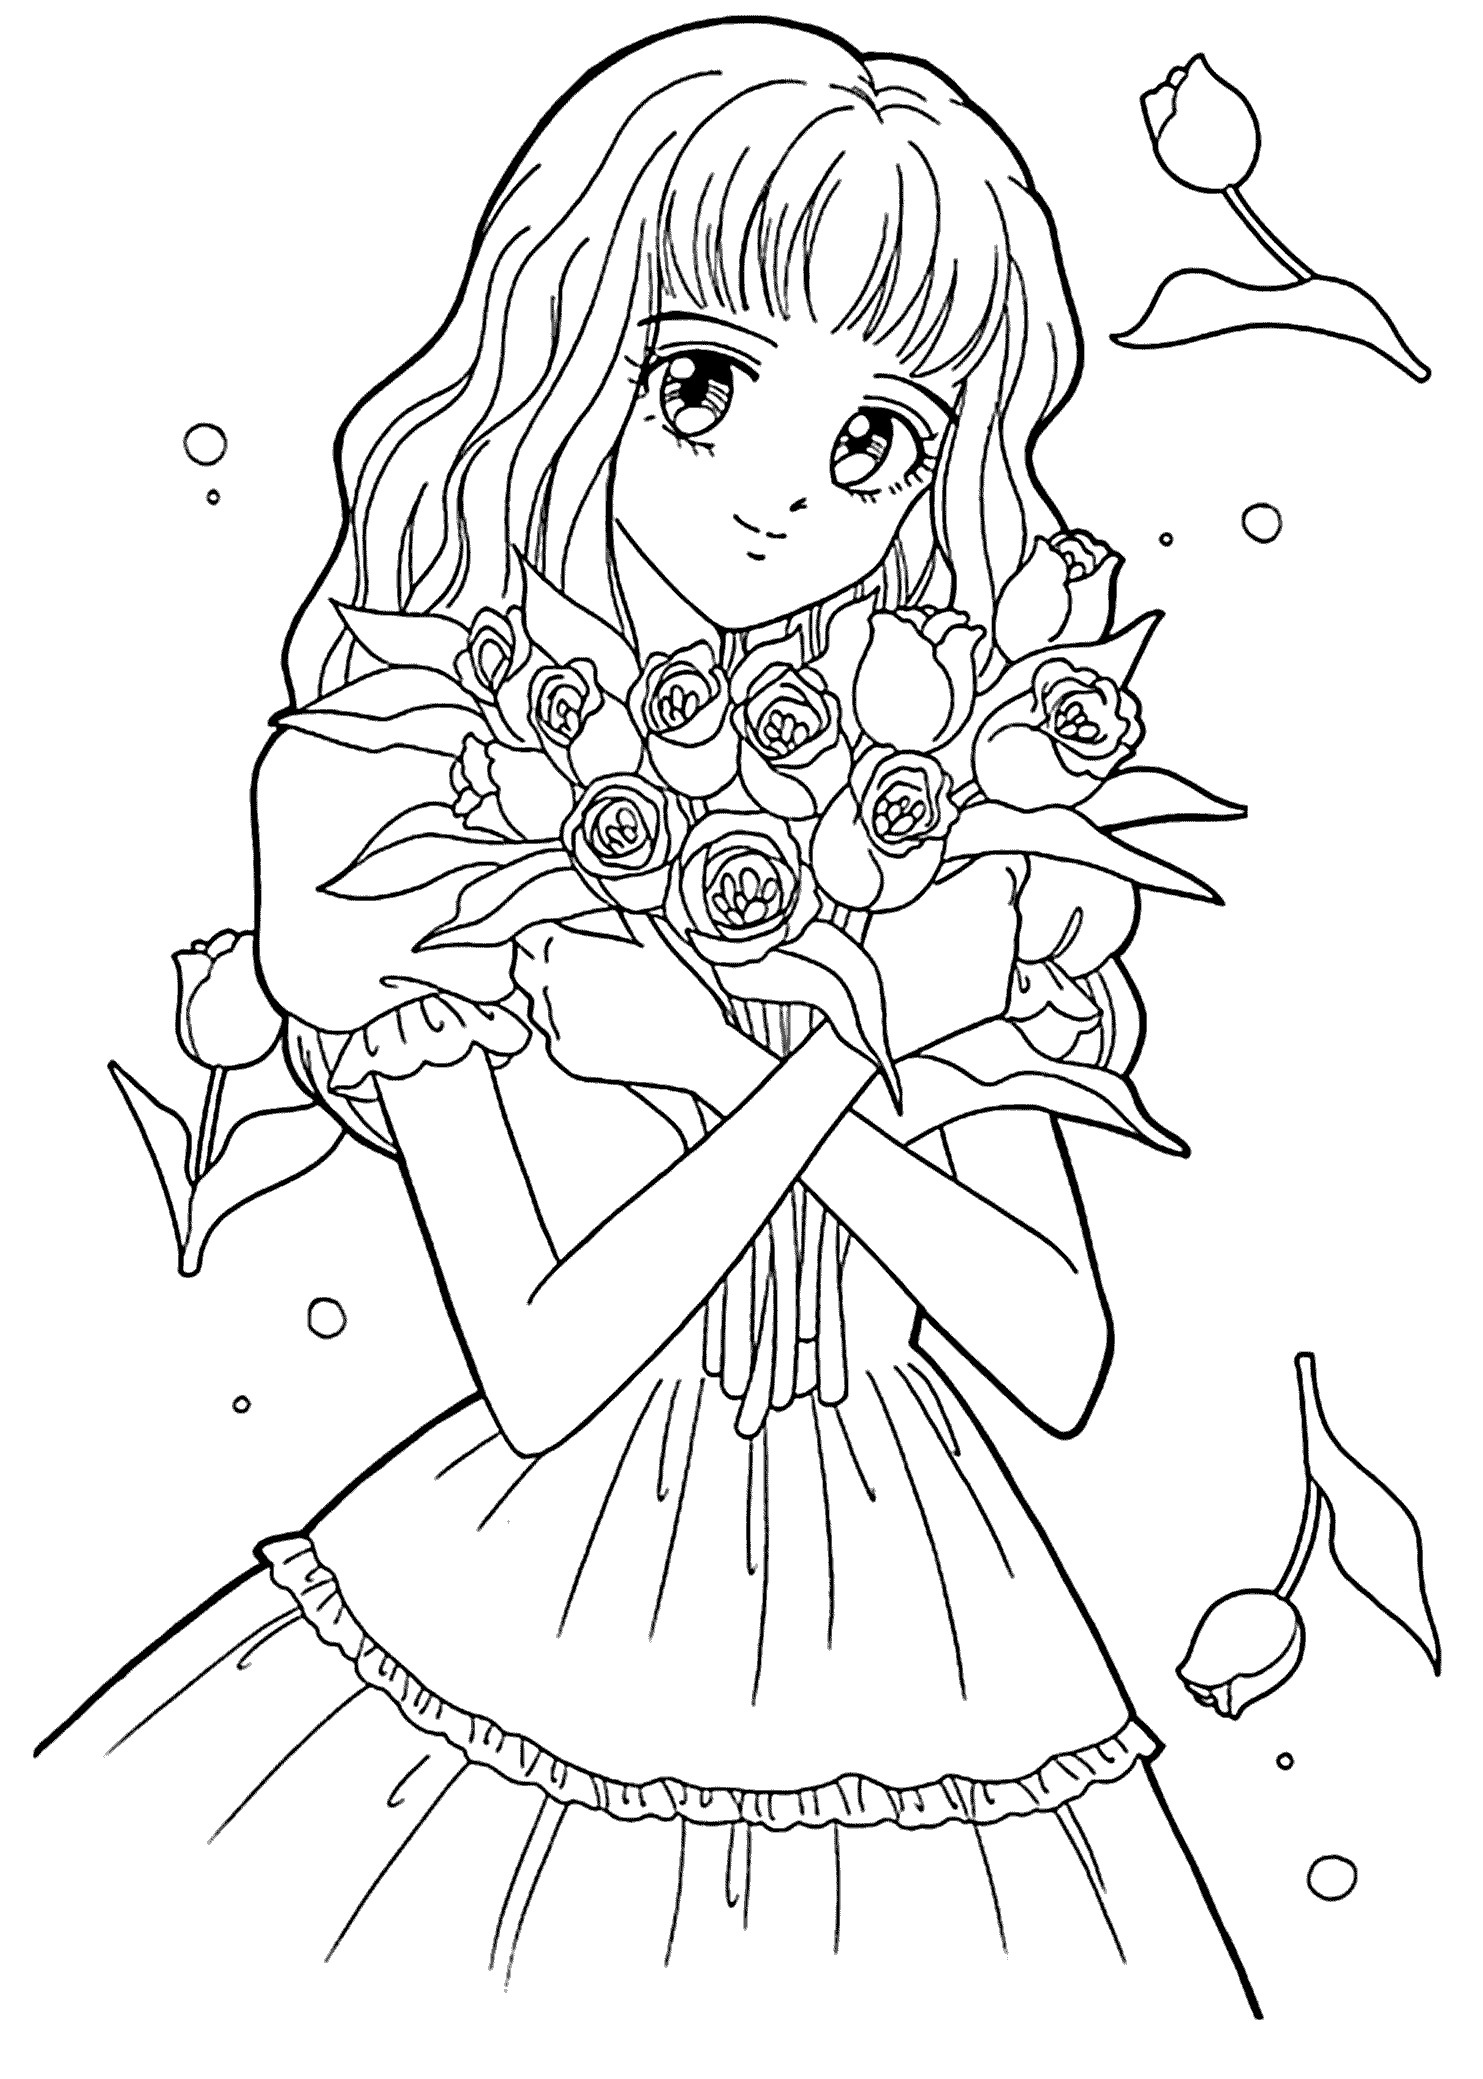 Coloring Pages For Girls People
 Best Free Printable Coloring Pages for Kids and Teens